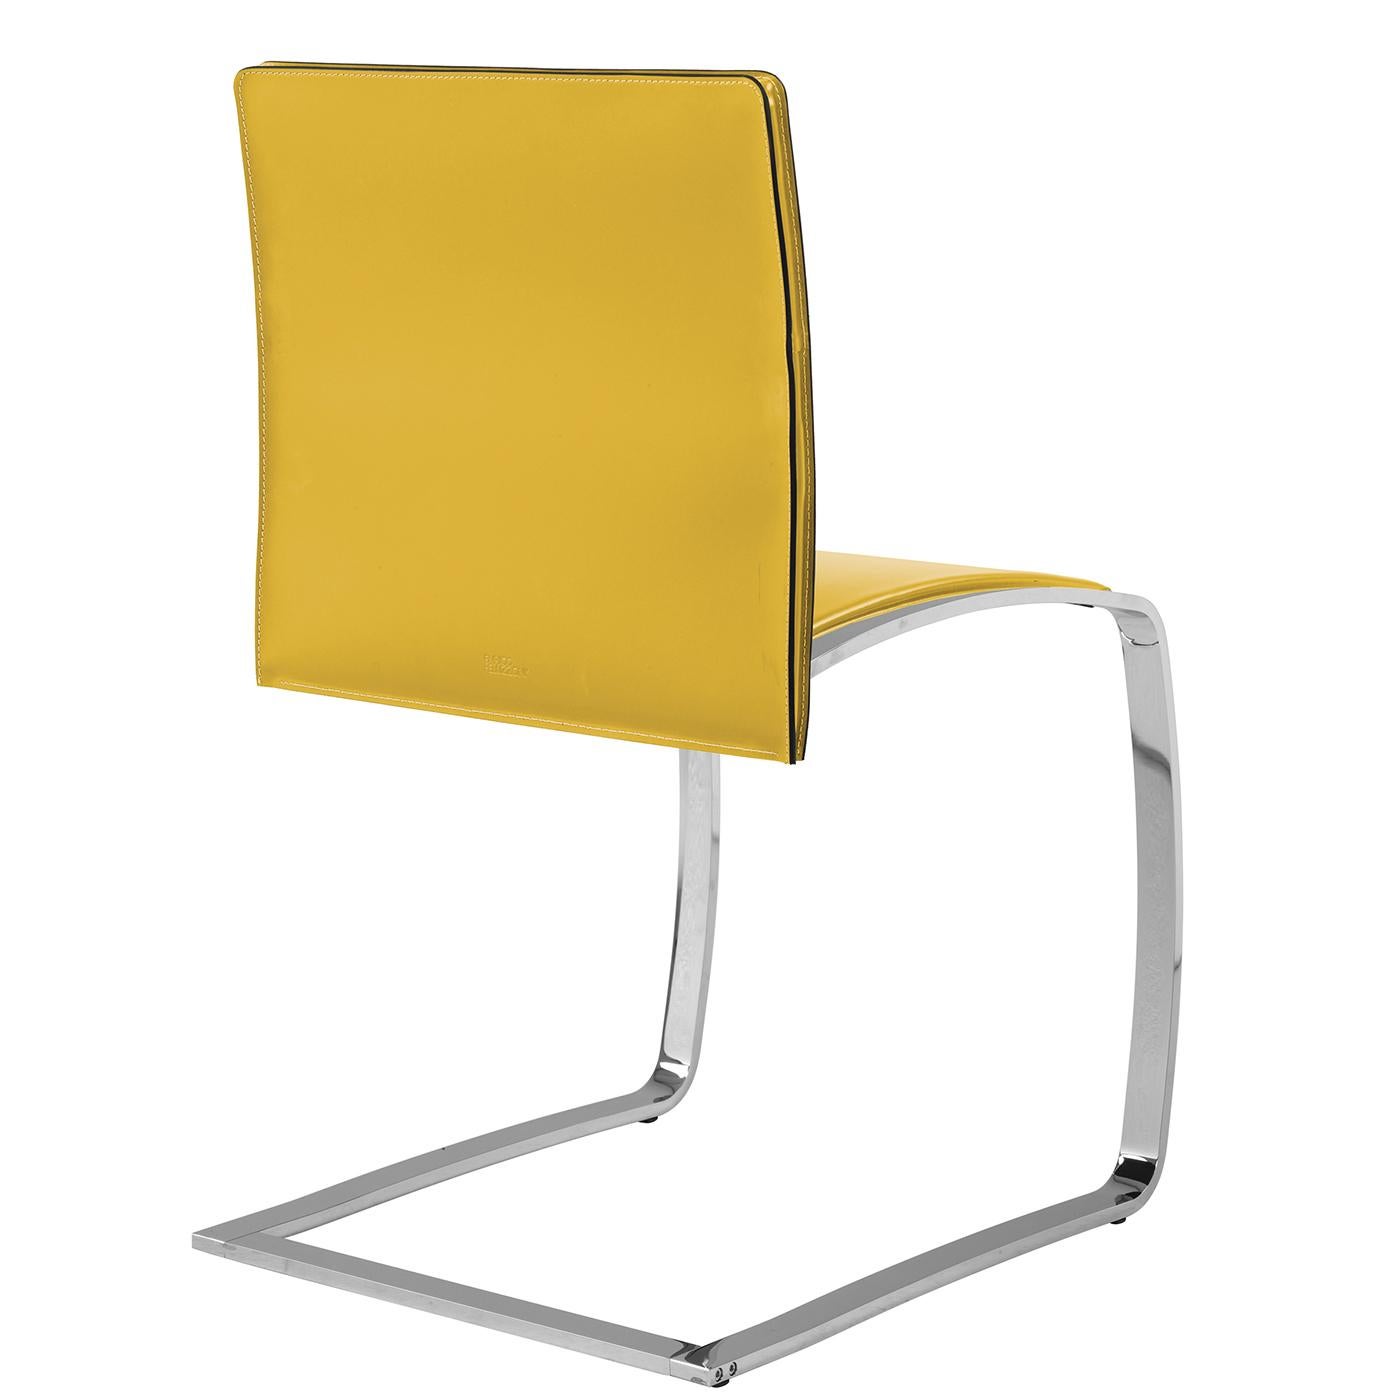 This chair's minimalist lines are synonymous with great elegance, as its super-thin, sinuous profile creates a barely-there silhouette. Its cantilever base of rectangular steel plates has a bright chrome finish. The seat and back are covered with